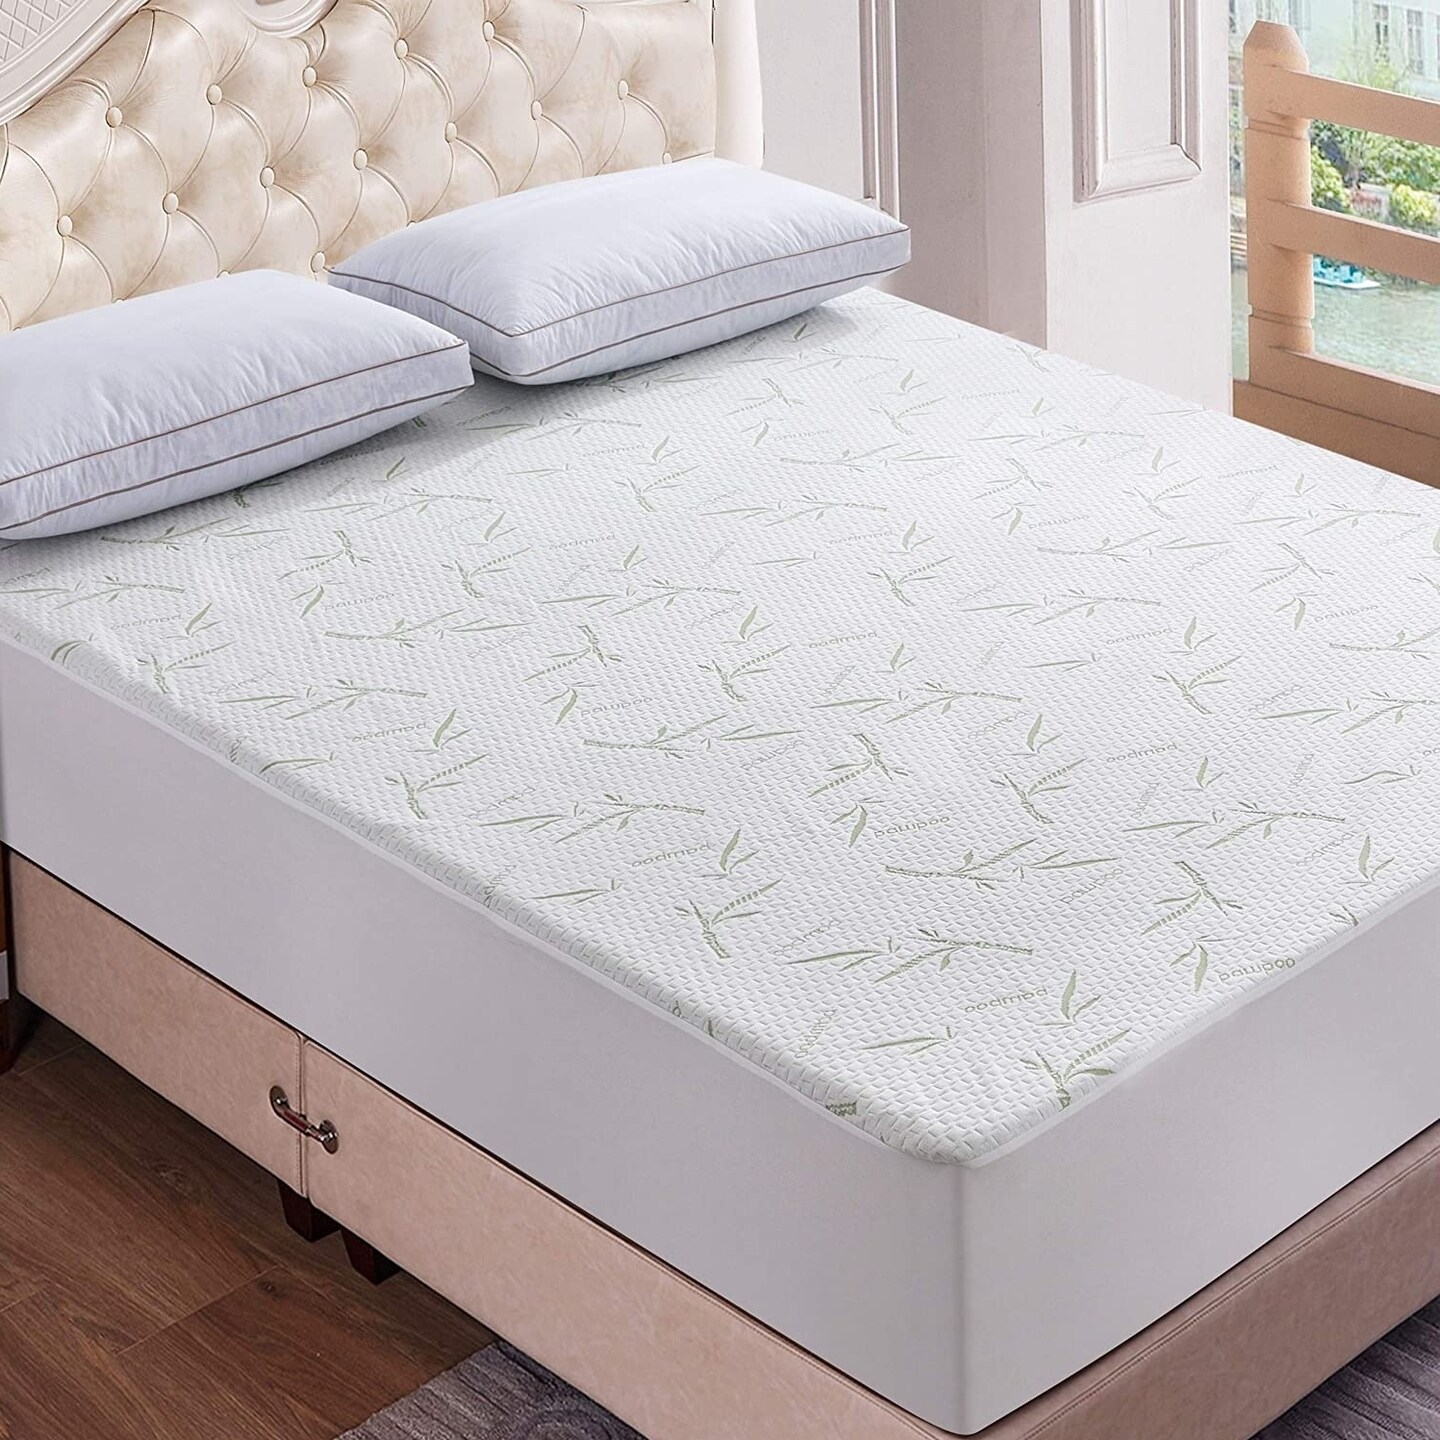 Lux Decor Collection Bamboo Mattress Protector-Waterproof Ultra-Cooling